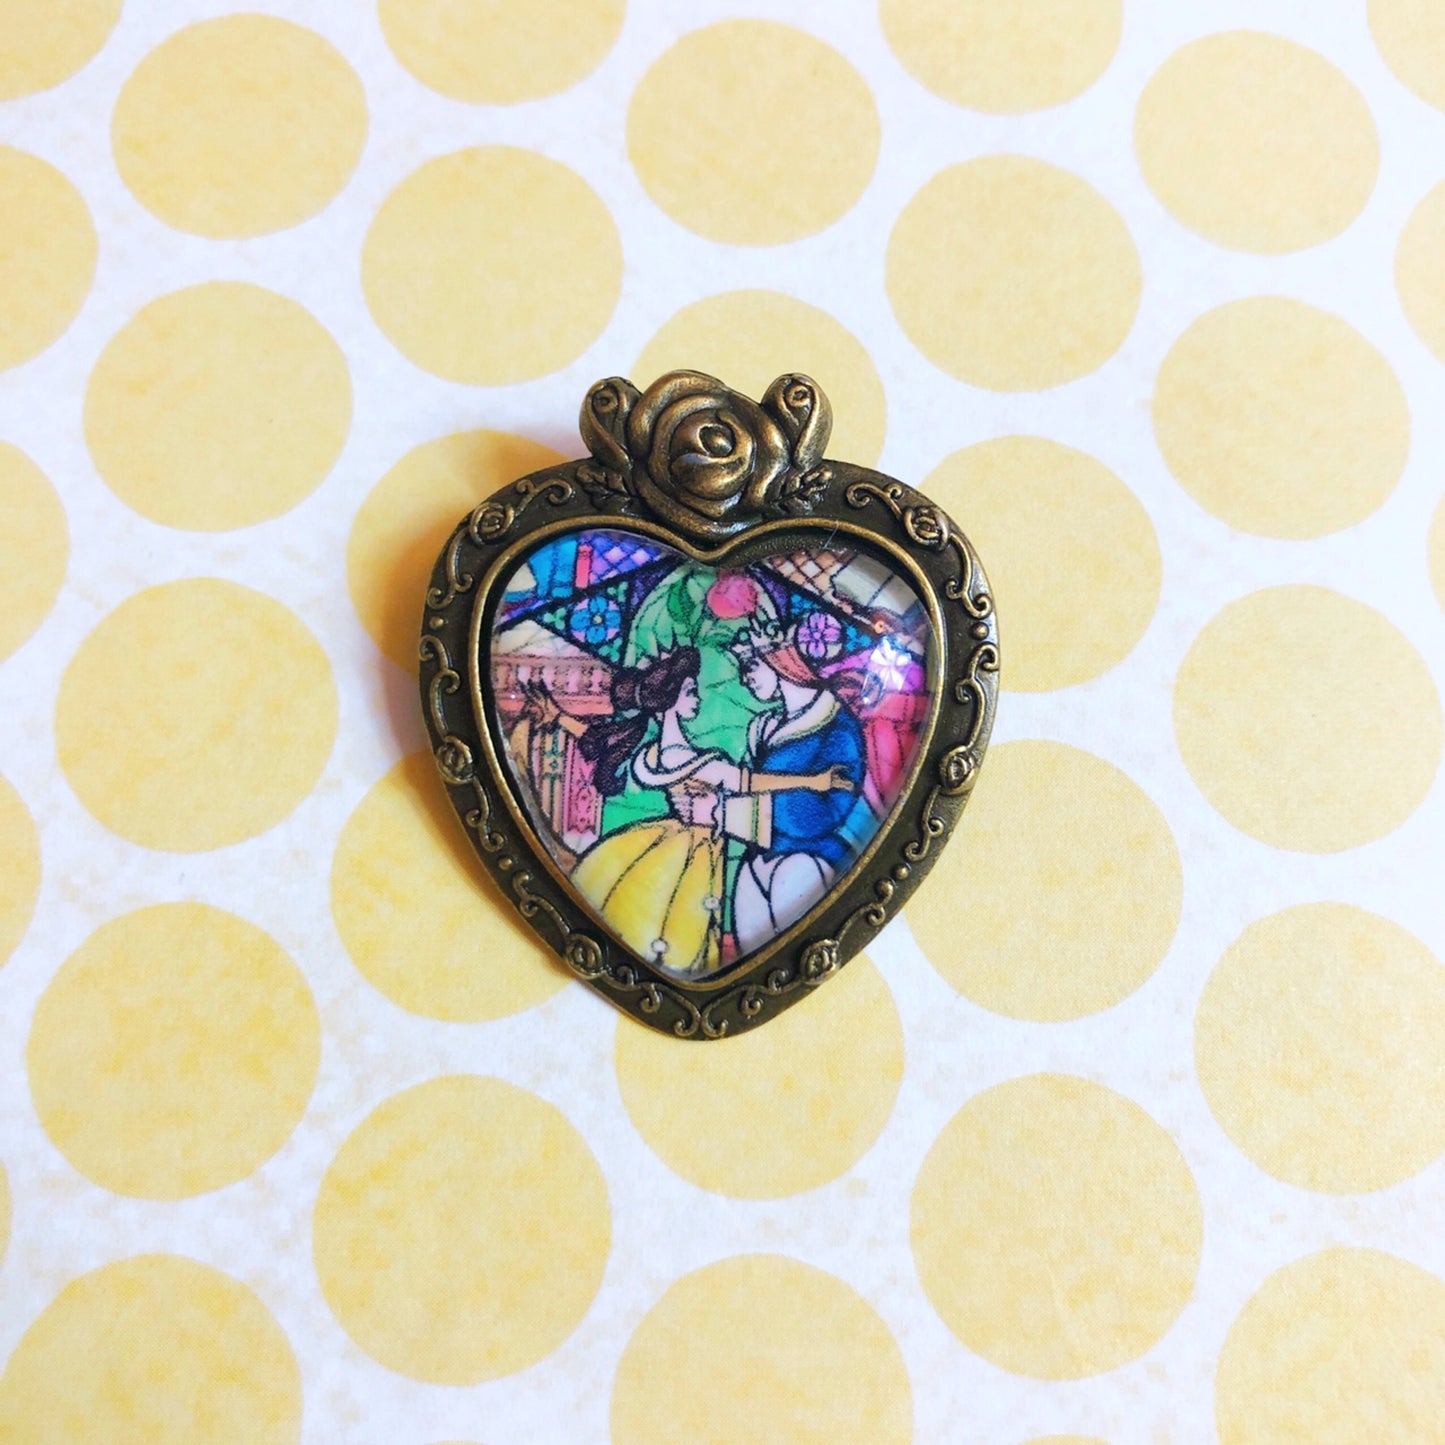 Belle & Prince Heart Stained Glass Brooch